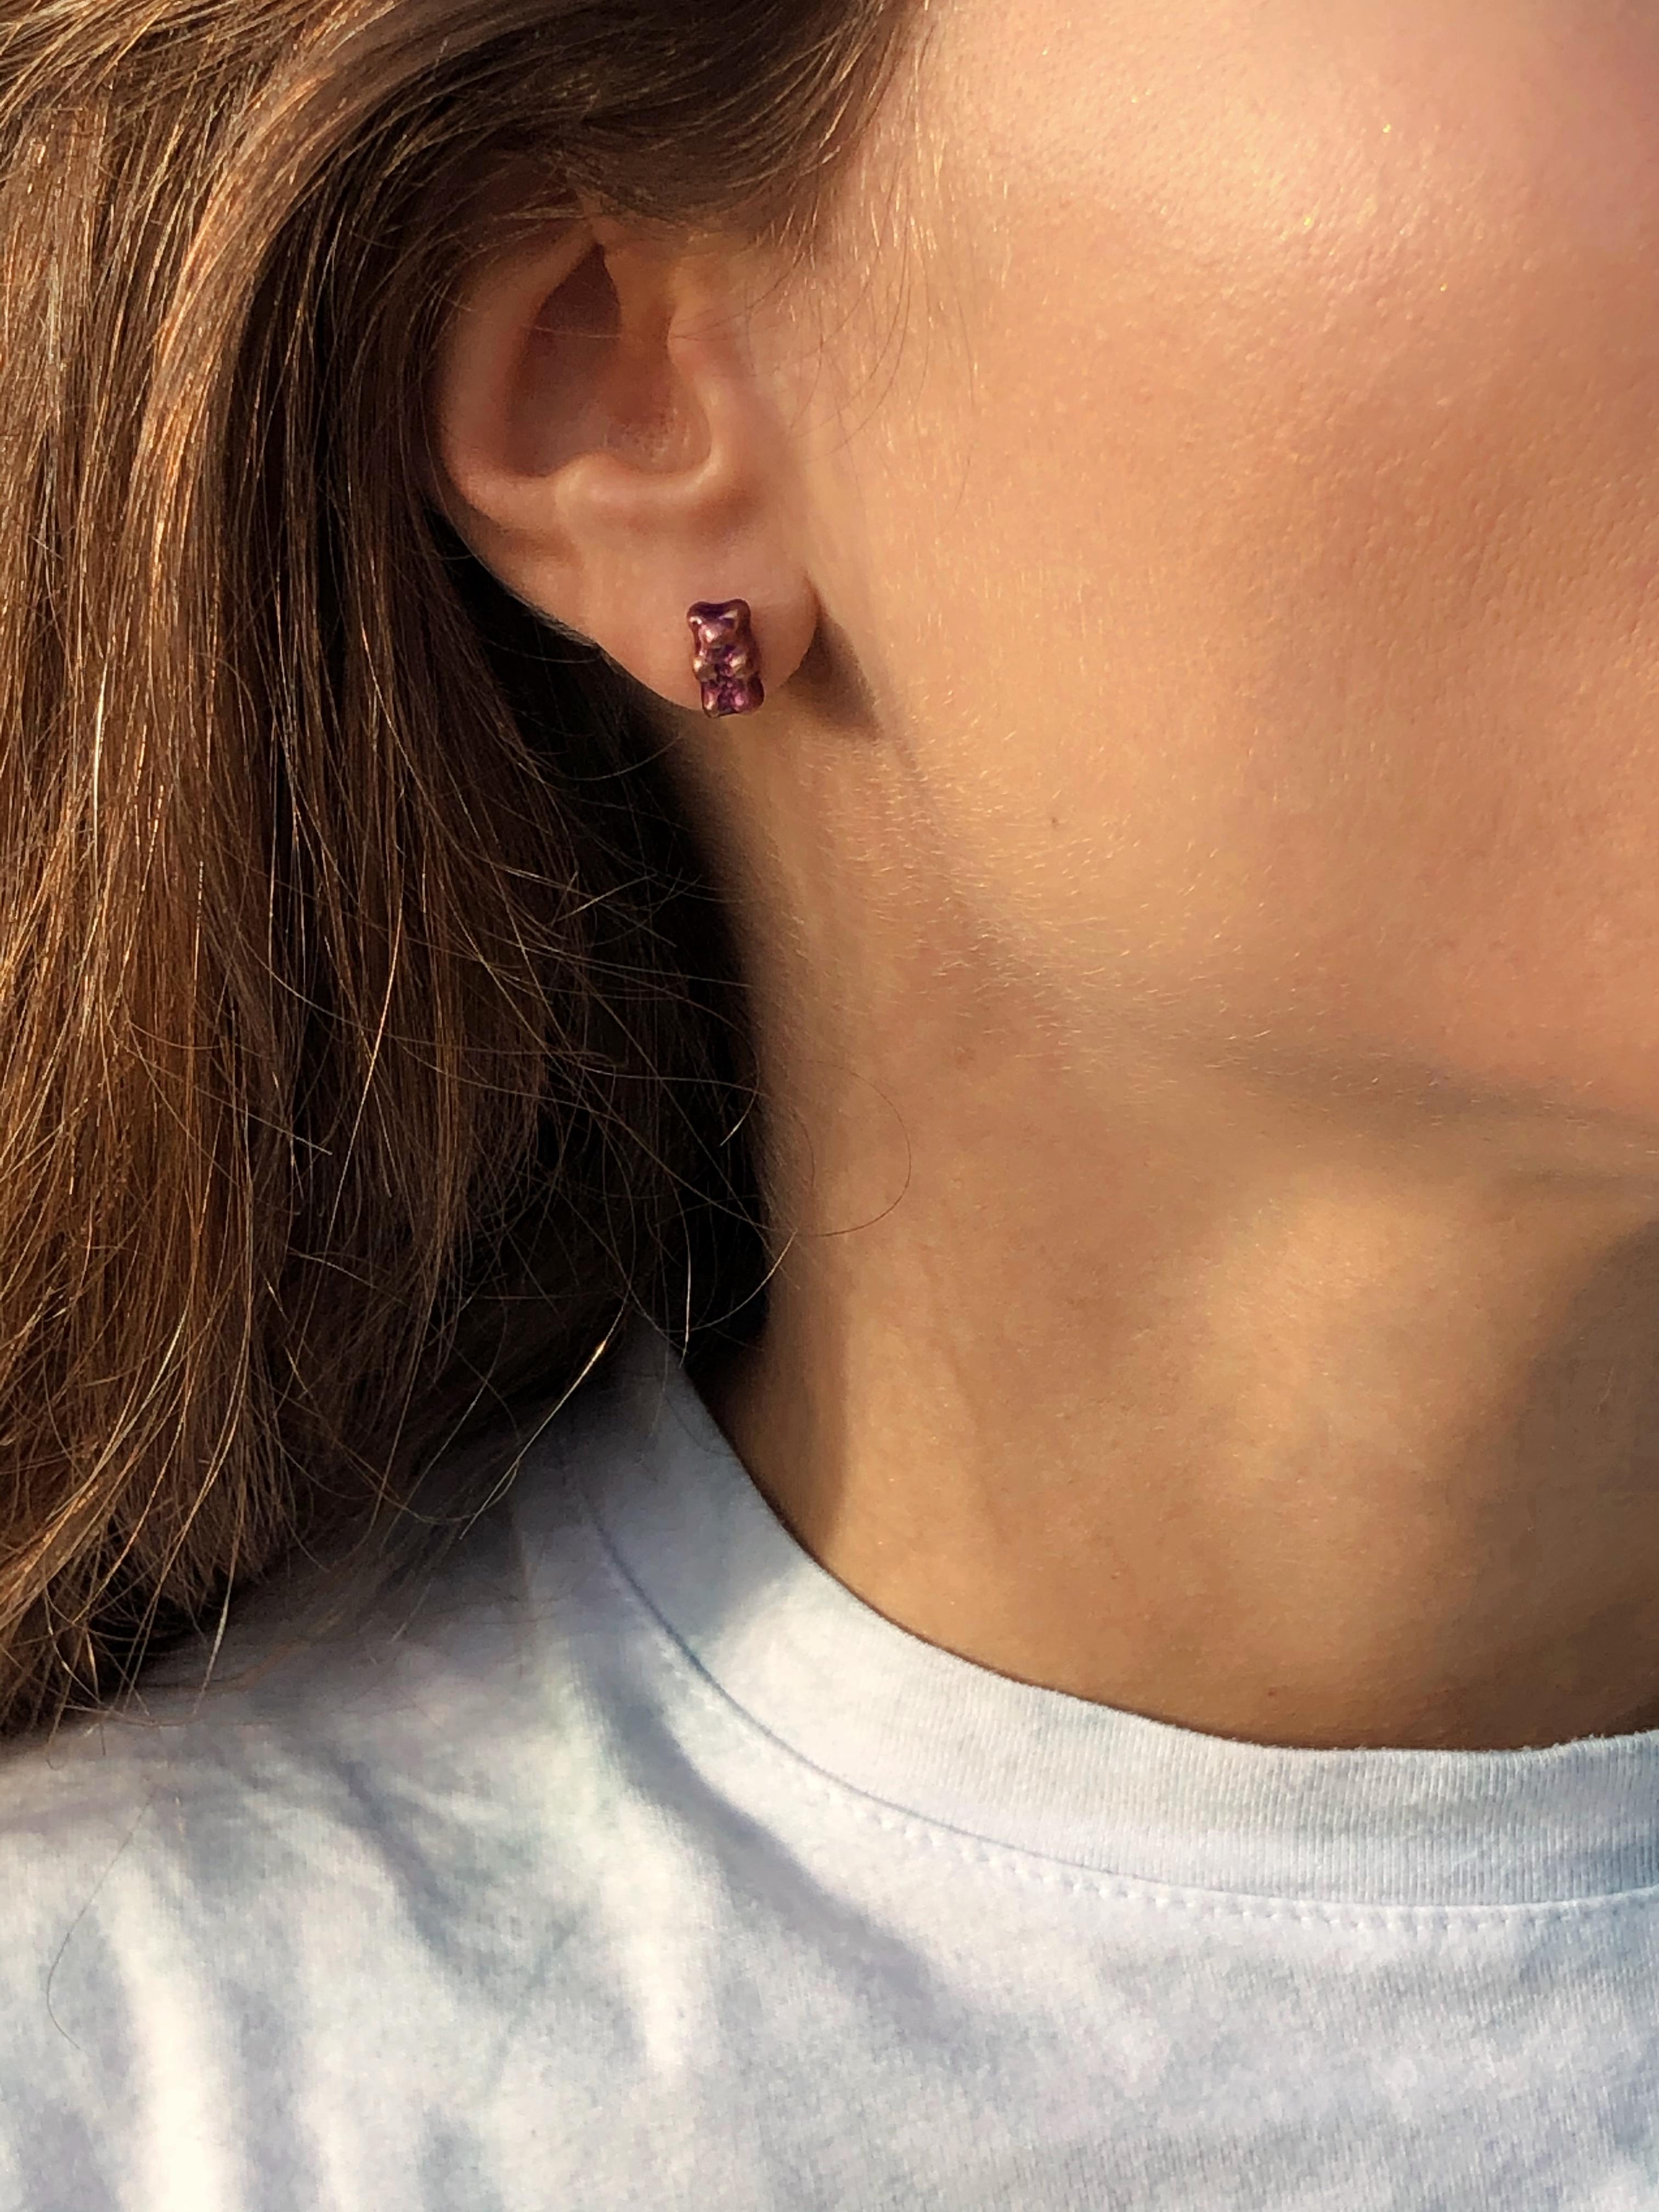 18K gold plated silver gummy bear stud earrings with transparent ombre plum enamel coverage. 

The Gummy Project by Maggoosh is a capsule collection inspired by the designer's life in New York City and her passion for breakdancing and other street